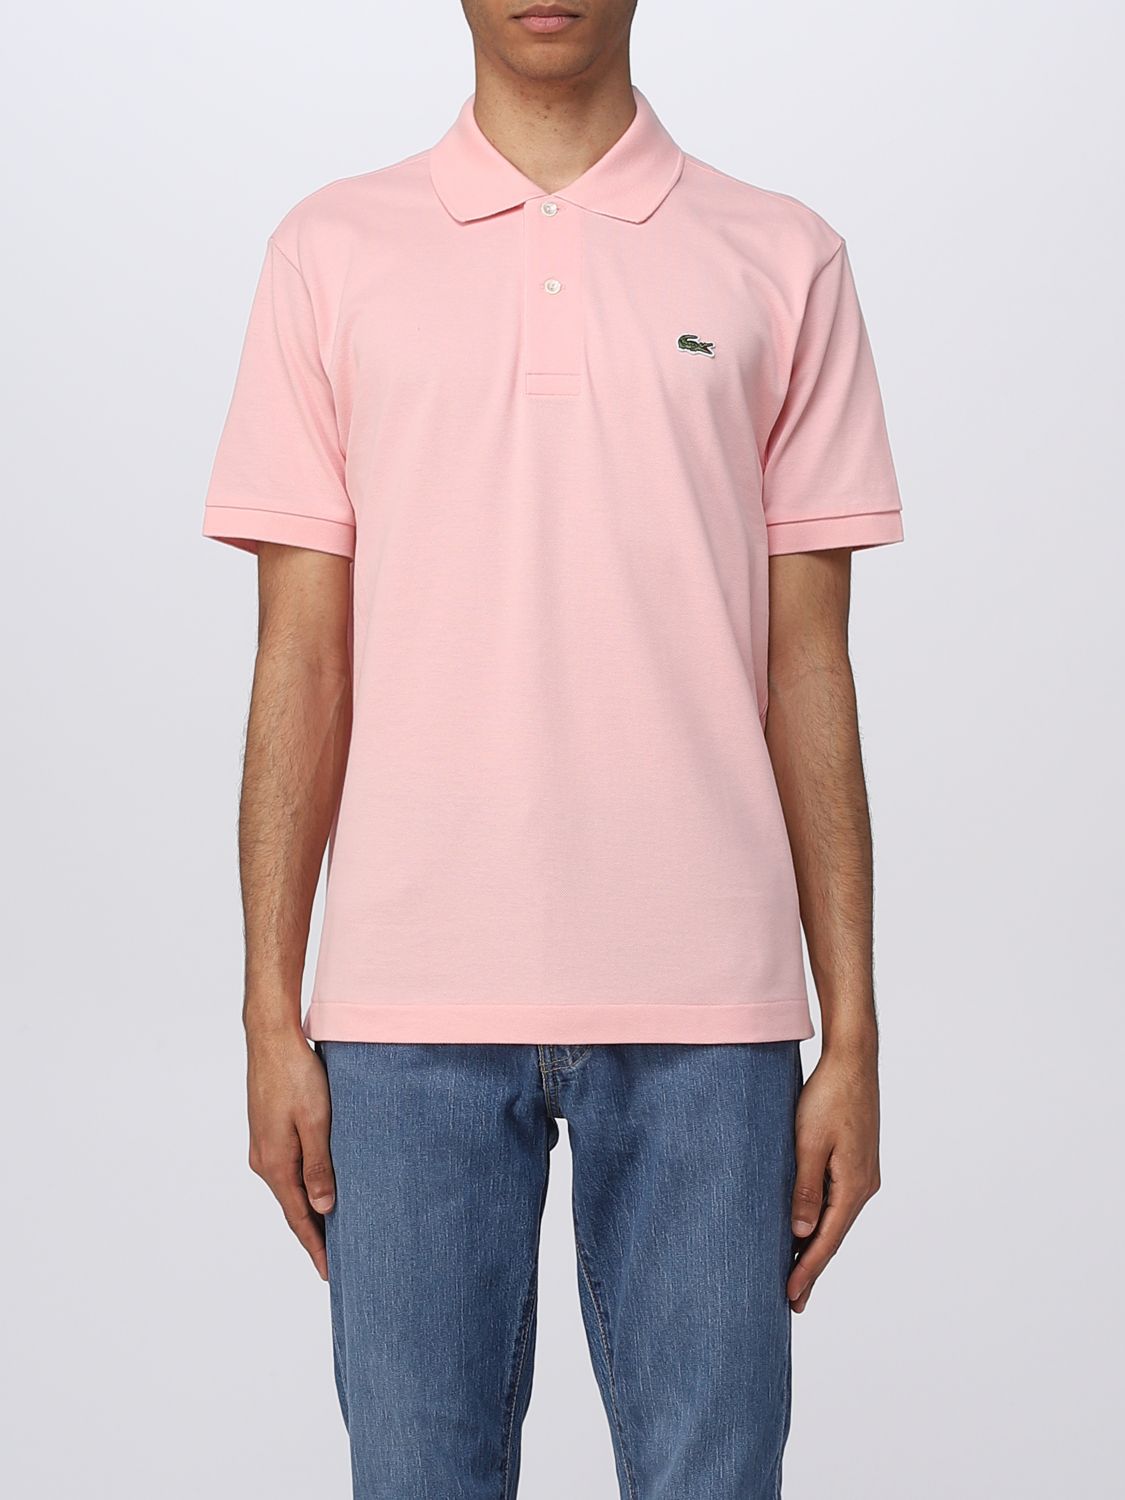 LACOSTE: polo shirt for - Pink Lacoste polo shirt online on GIGLIO.COM